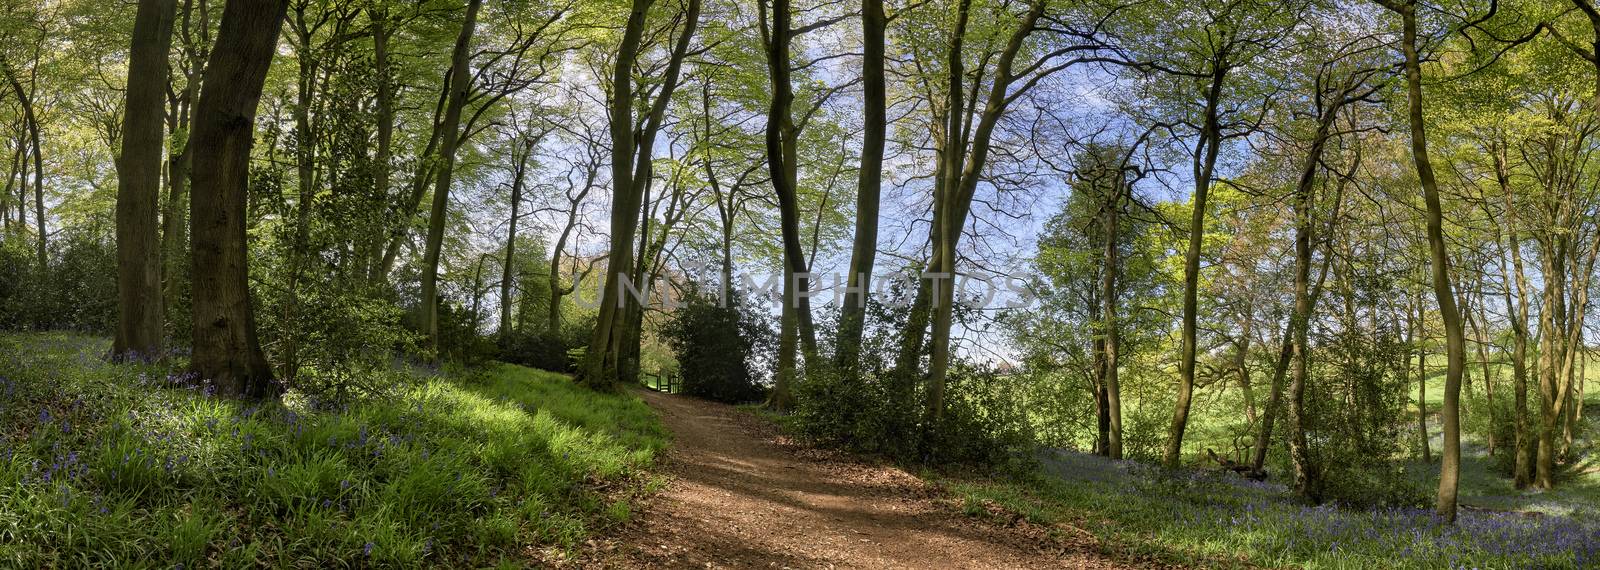 Panoramic view of woods showing a footpath leading upto a stile and flowering bluebells at springtime in The Chiltern Hills, England                             